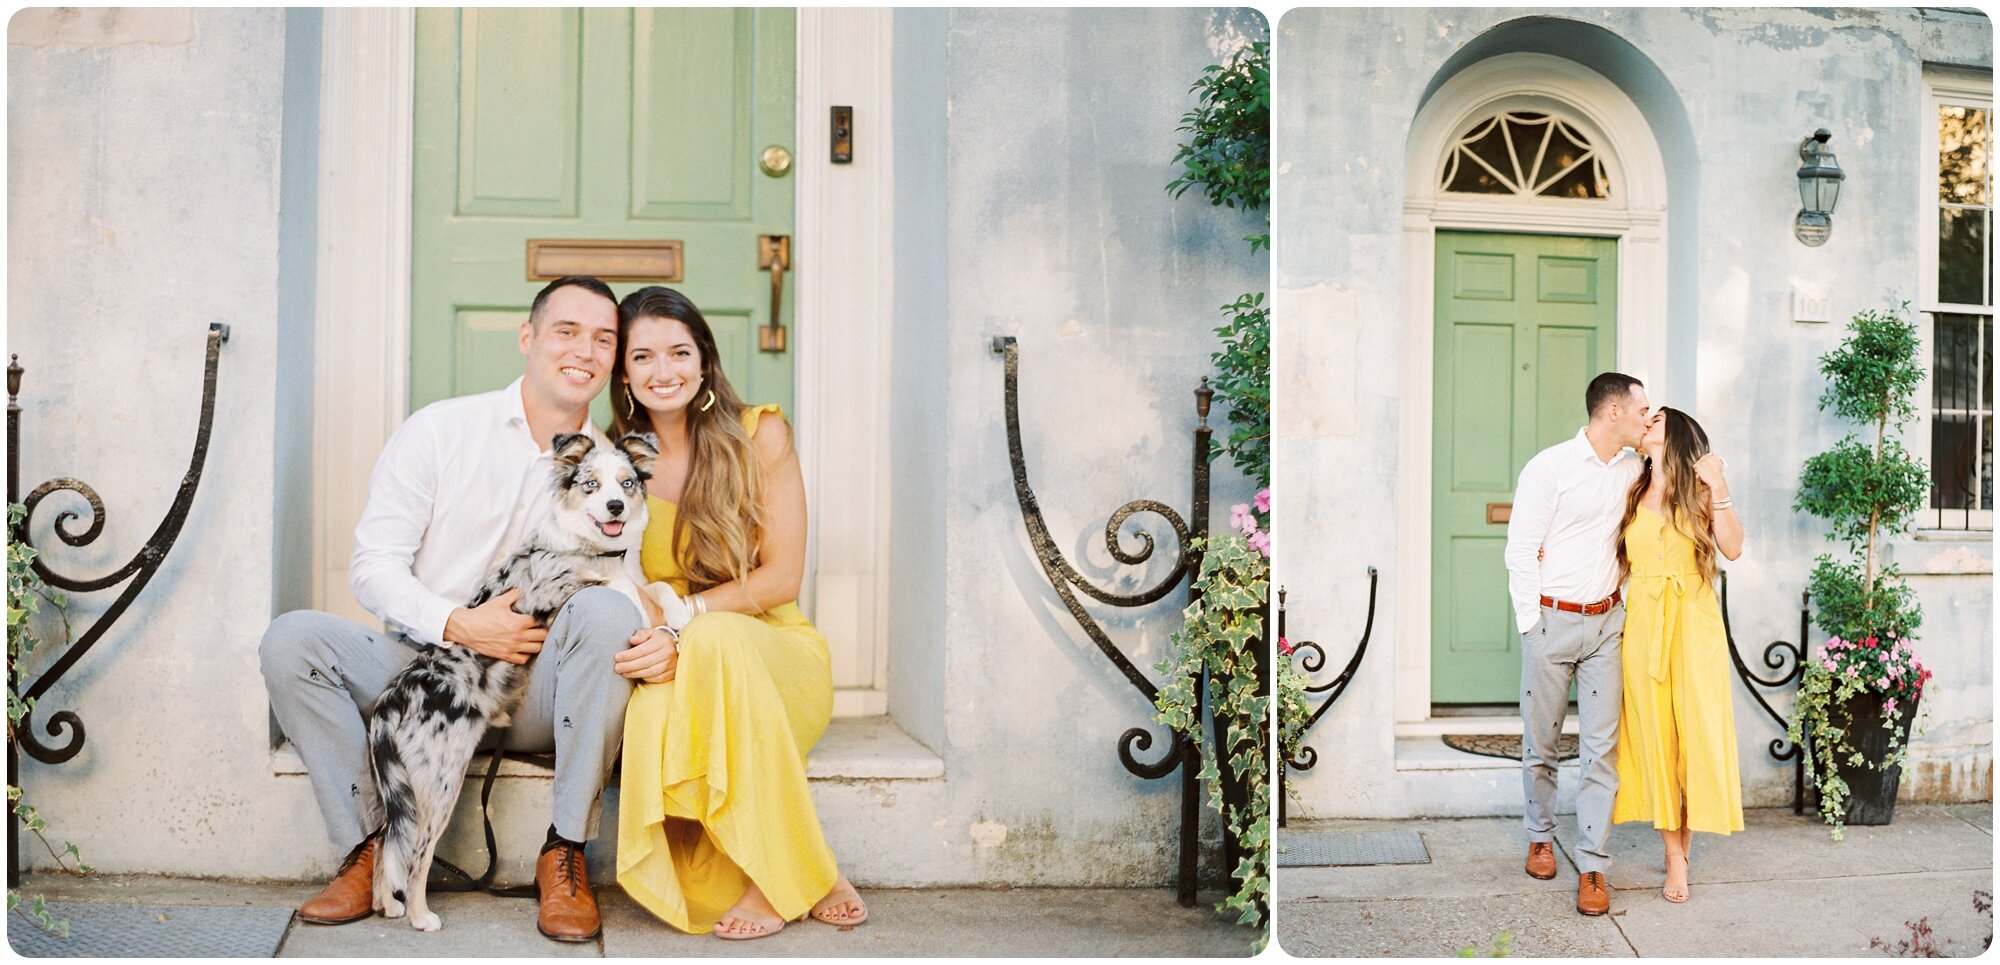 rainbow_row_yellow_blue_outfit_battery_downtown_charleston_engagement_puppy_outdoor_wedding_photographers_husband_wife_team_kailee_tim_kailee_dimeglio_photography_charleston_traveling_photographers_0015.jpg